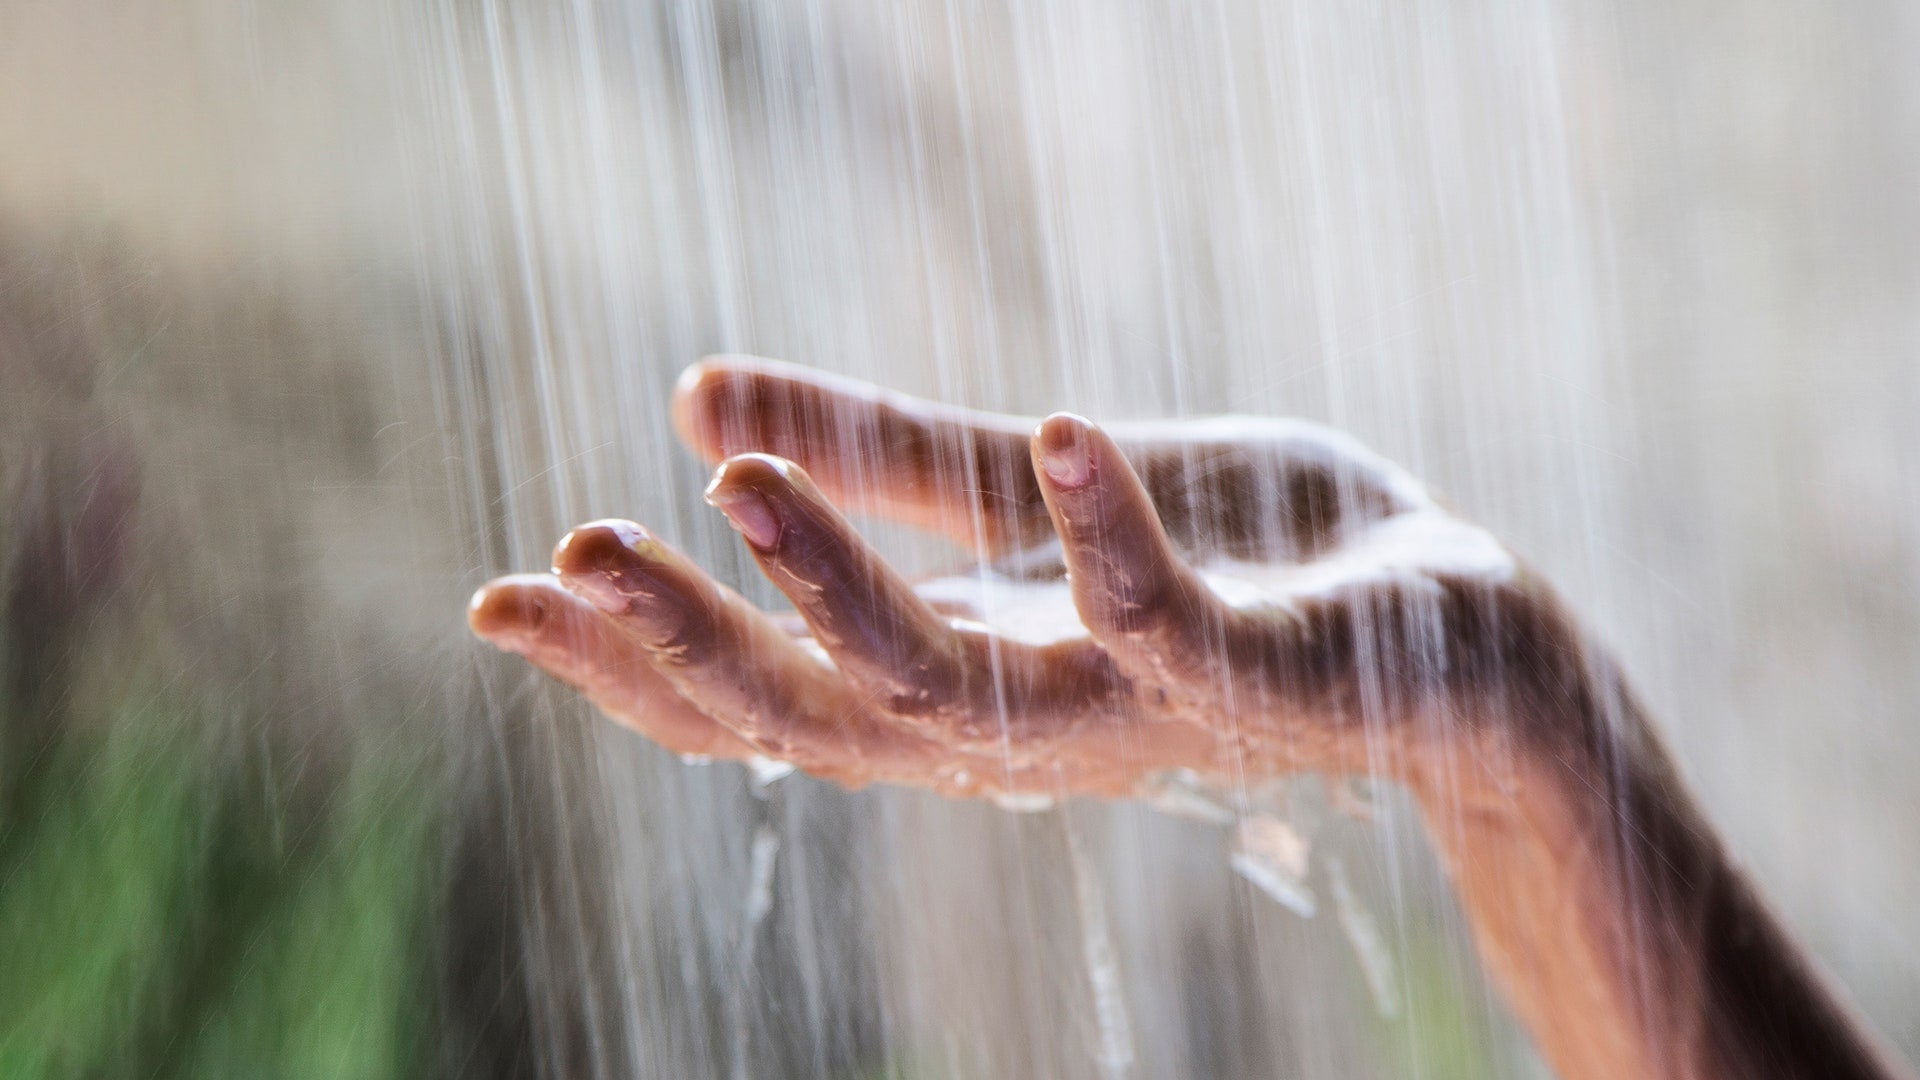 The Healing Power of Water: How Showering Benefits Your Health